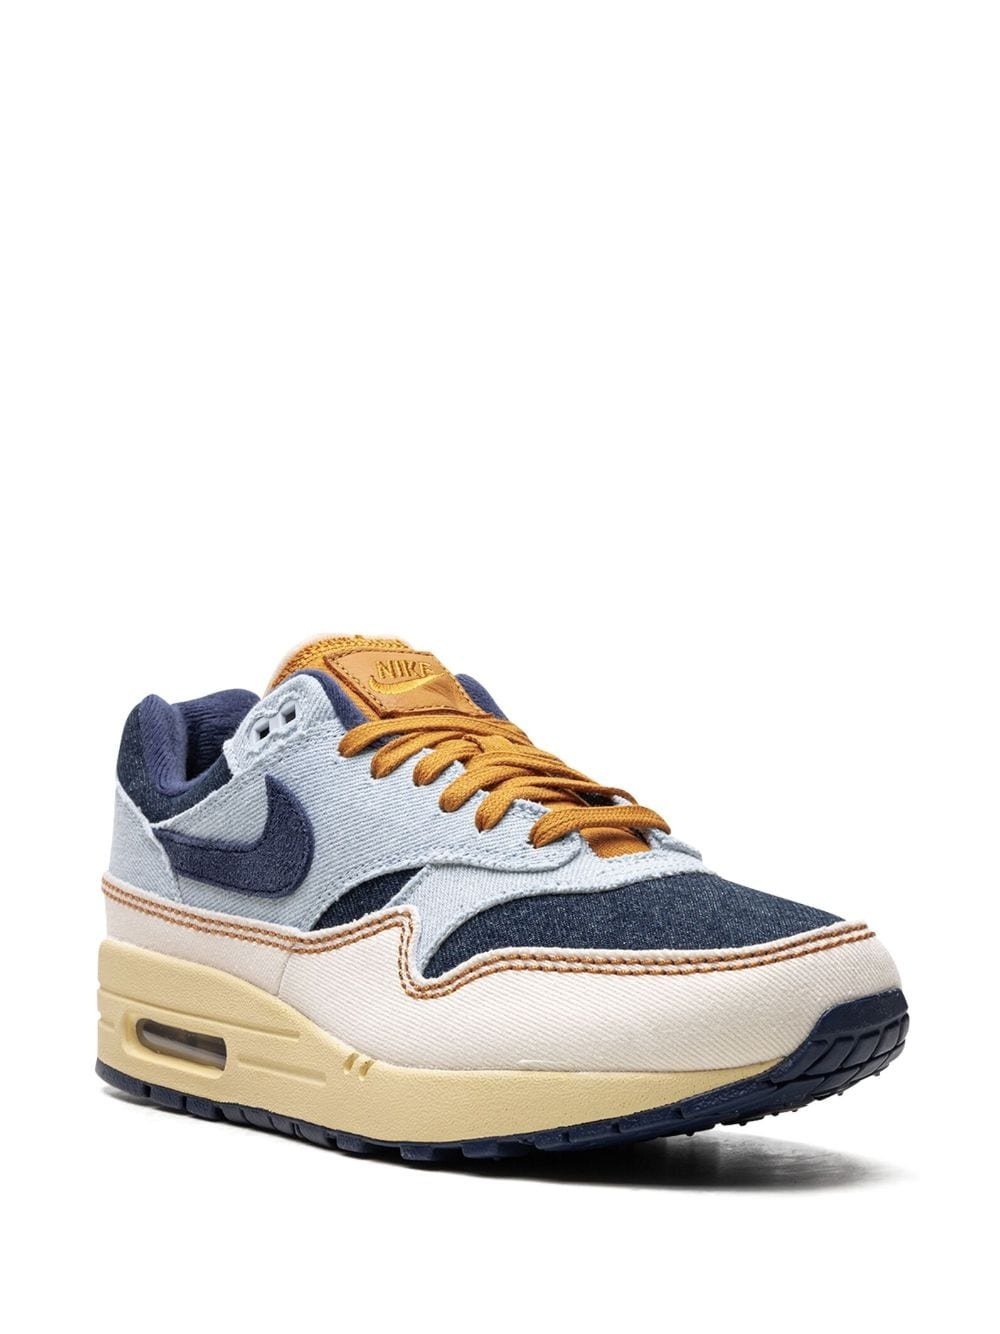 Air Max 1 '87 "Aura/Midnight Navy/Pale Ivory" sneakers - 2